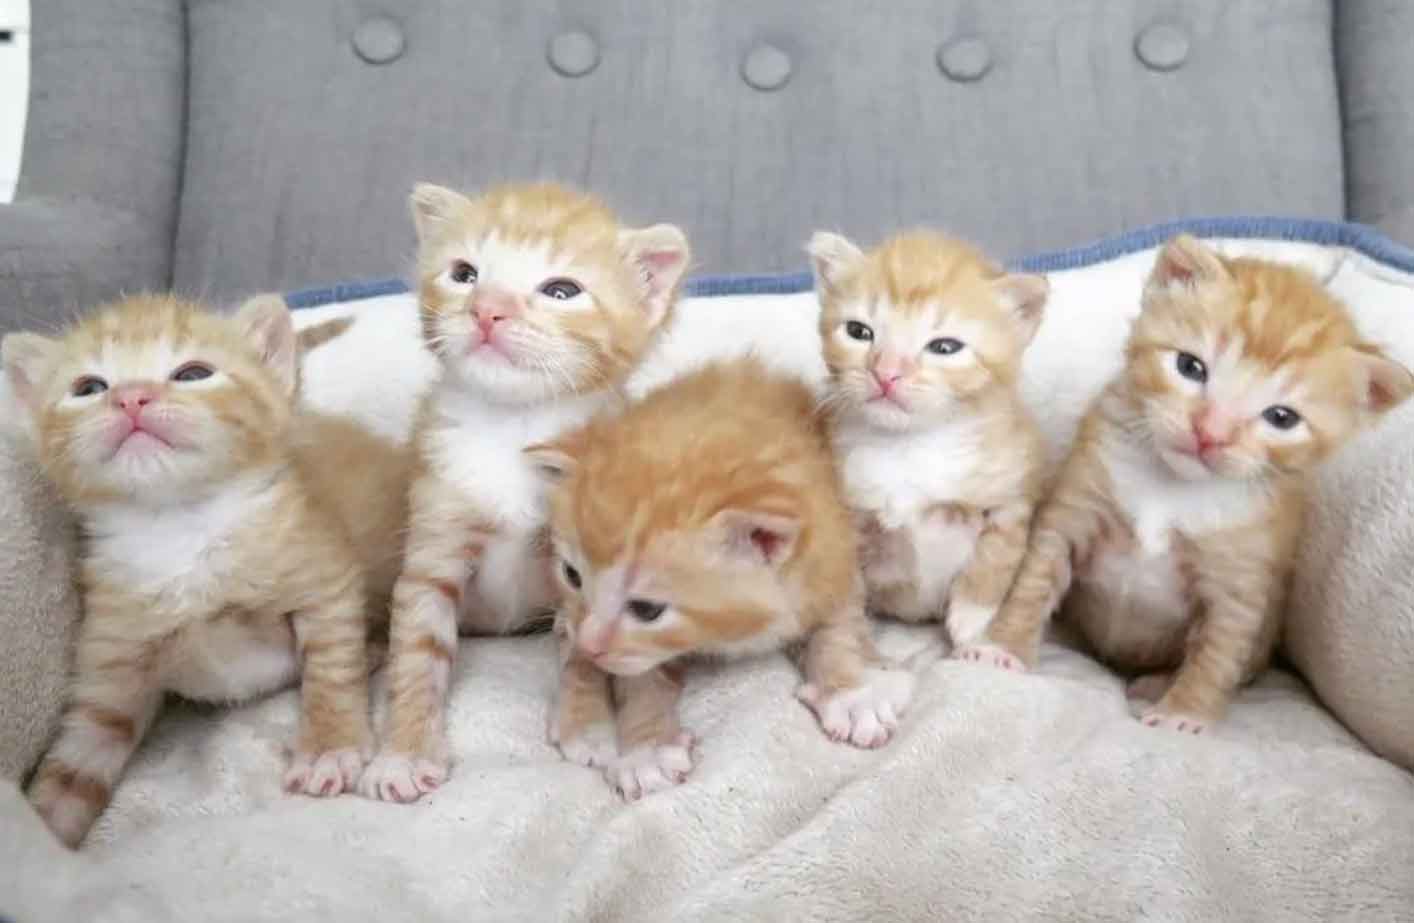 5 Orphaned Ginger Kittens Get Help Just in Time